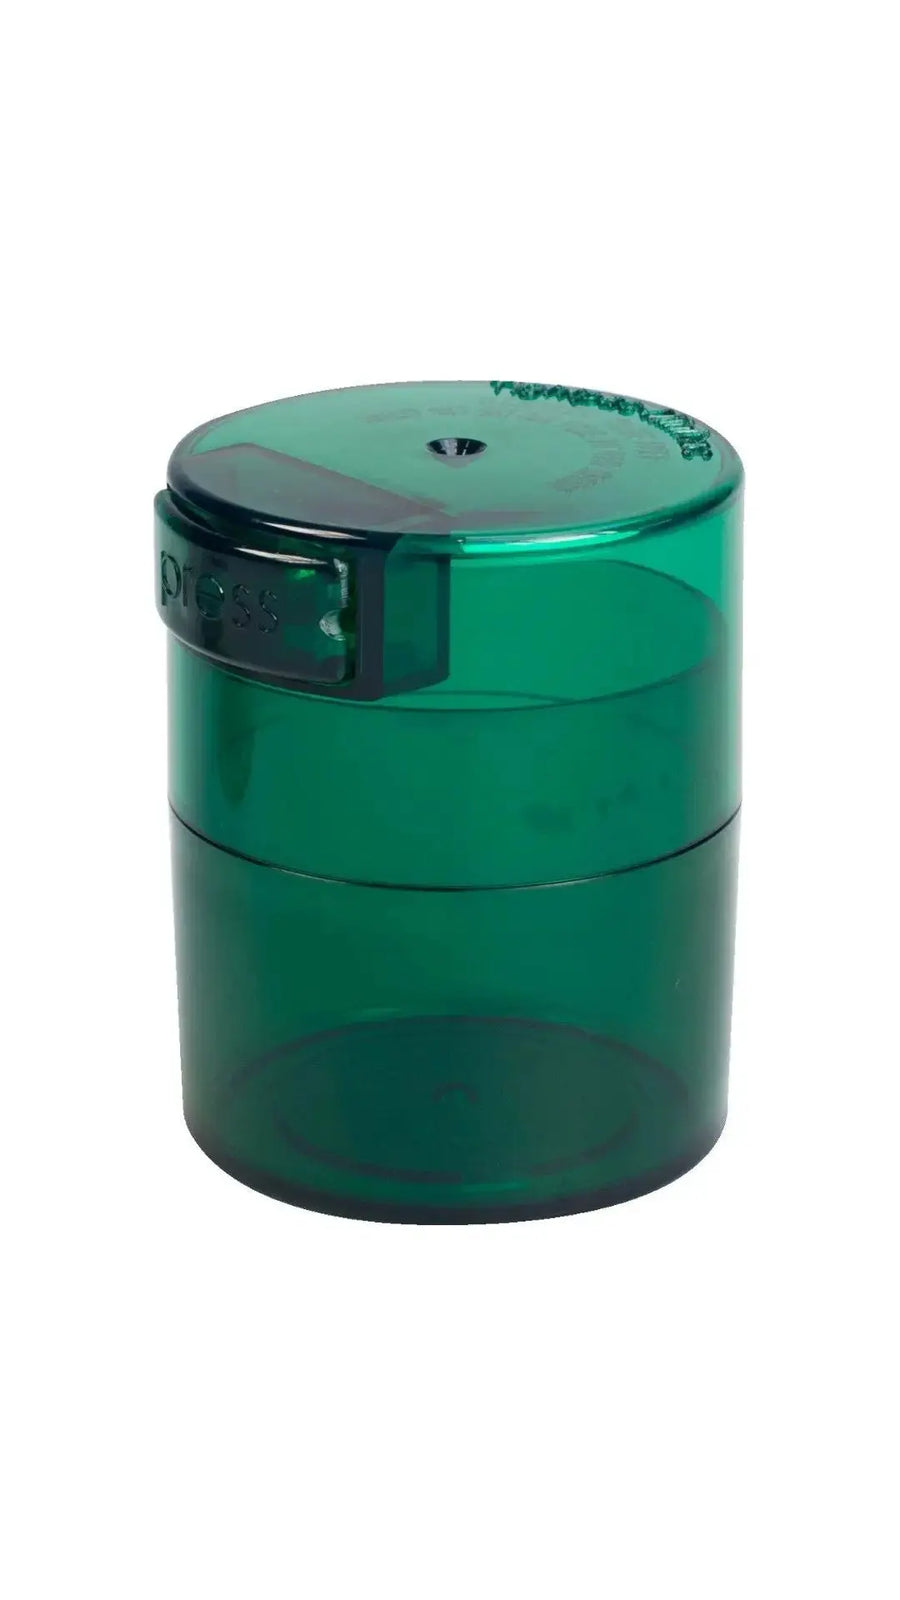 Minivac 0,12 liter / 40g / Clear / Green Tint - TightVac Europe - The eassiest storage solutions